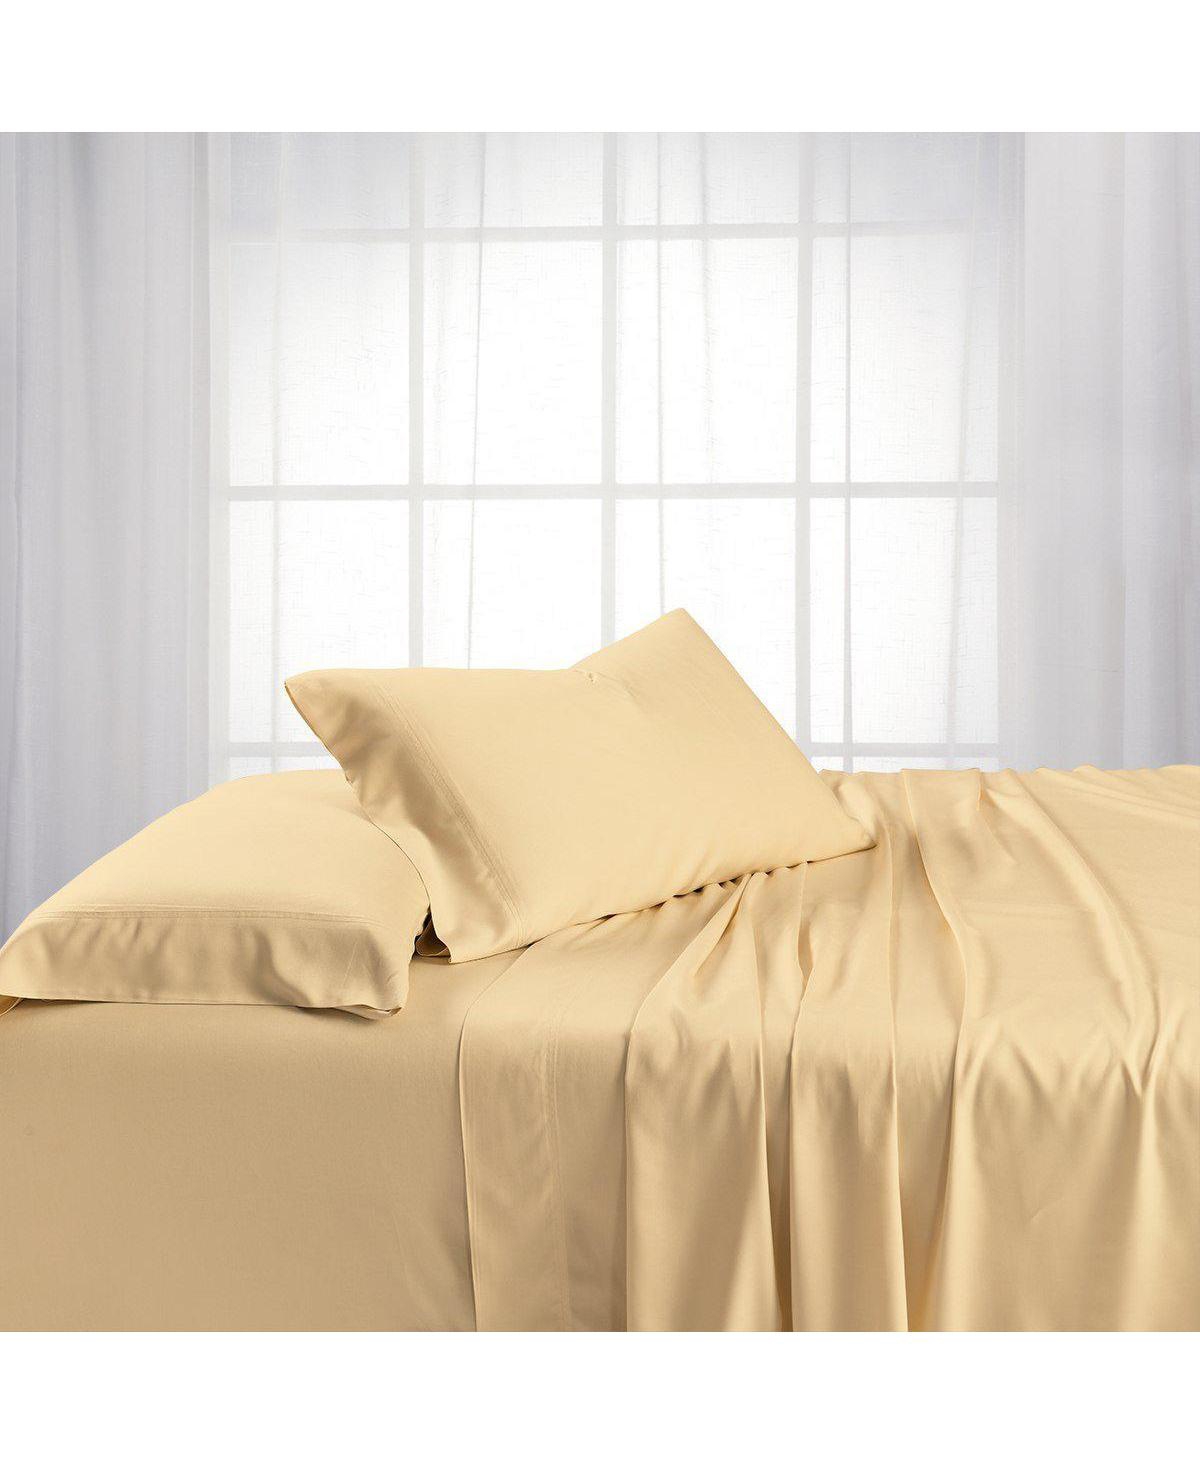 Egyptian Linens Luxury & Heavyweight Viscose From Bamboo 600 Sheet Set, California King In Canvas